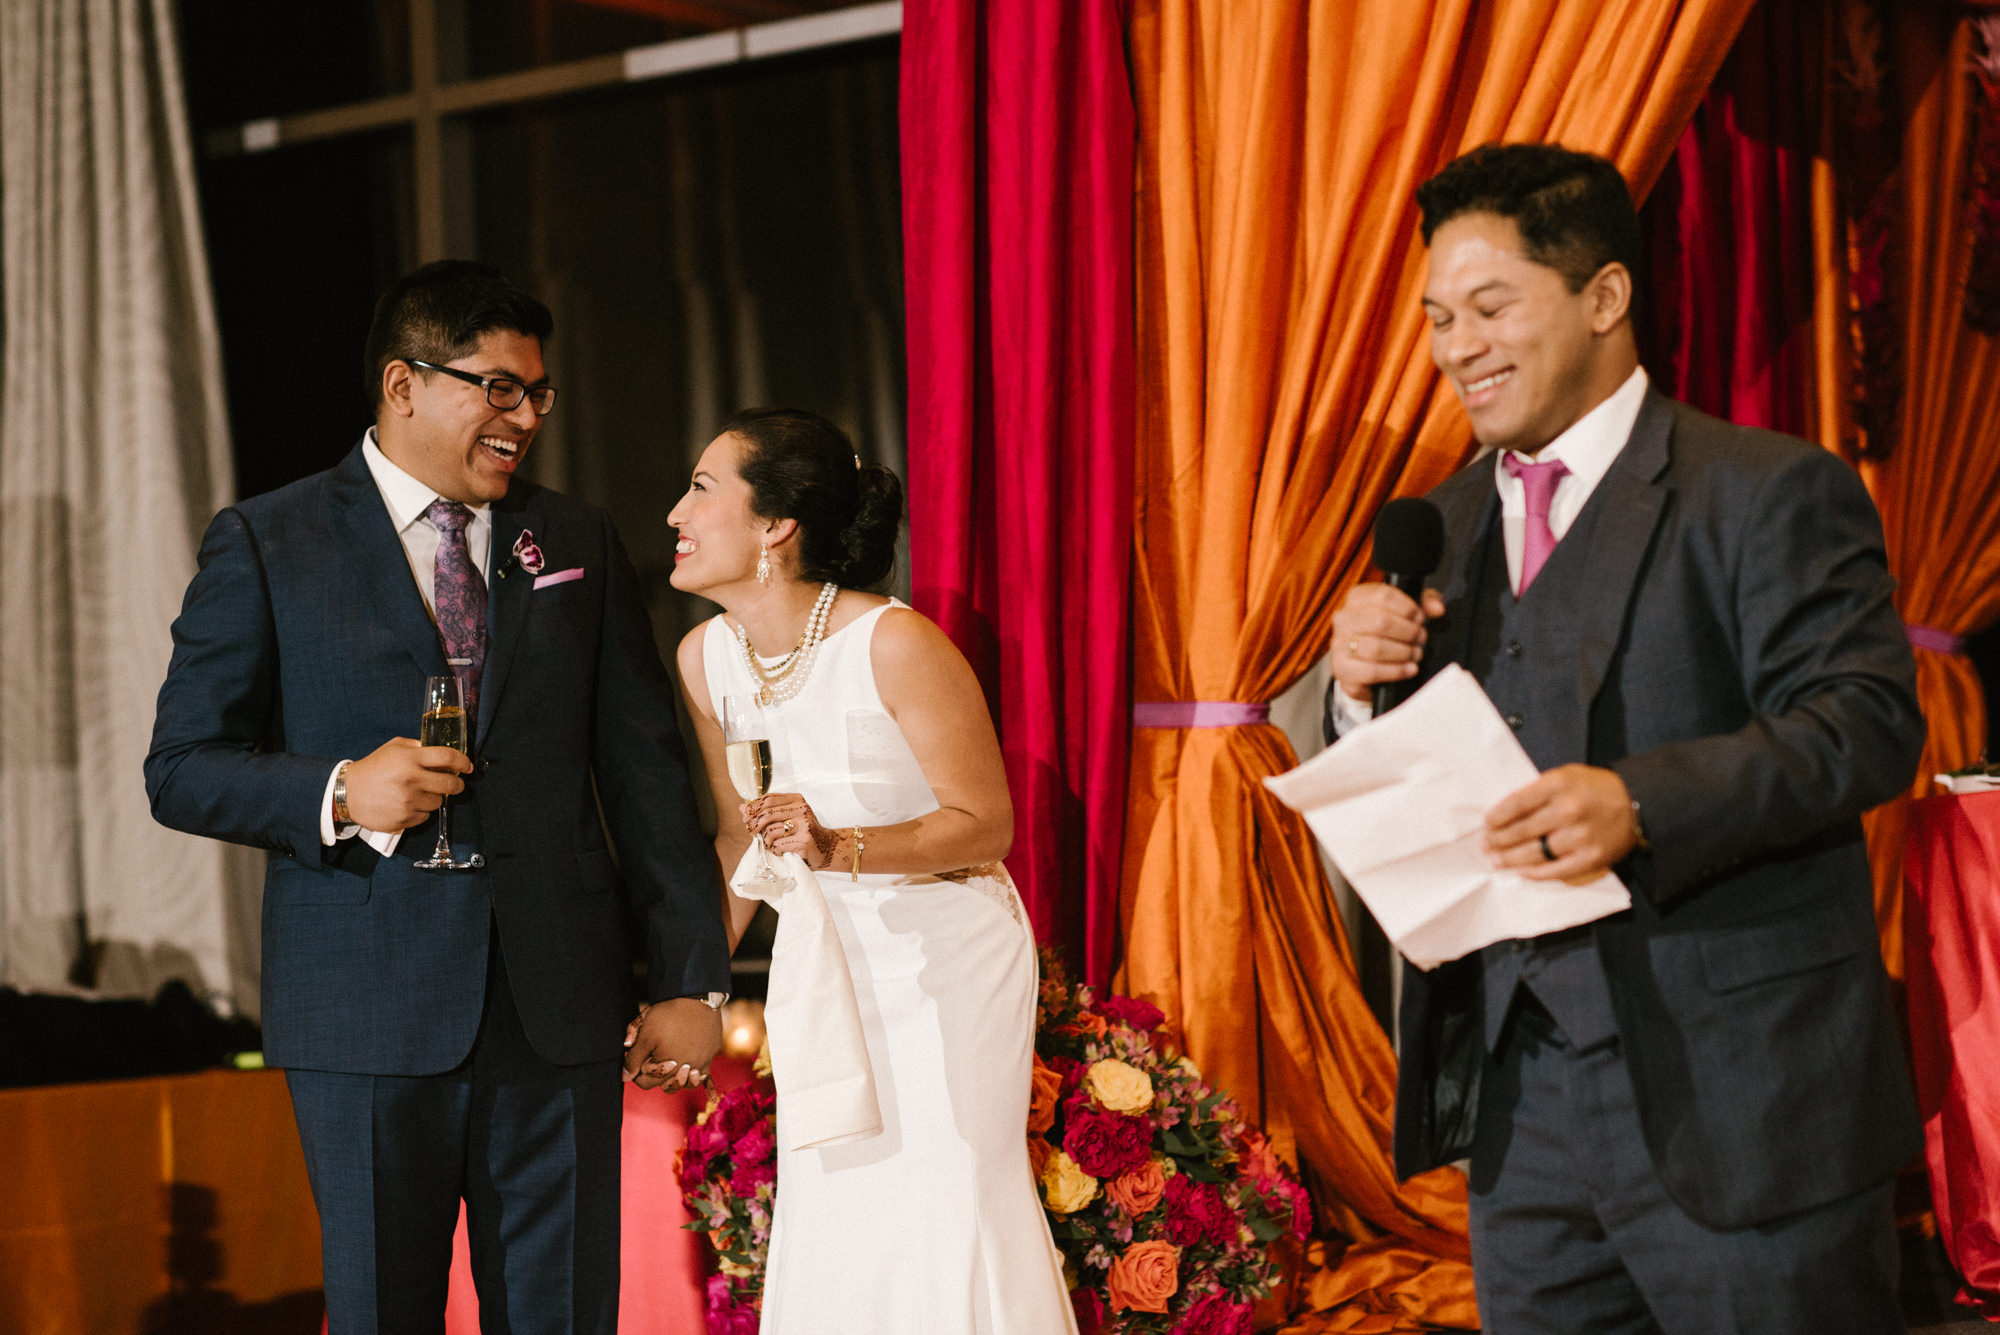 Neel's brother gives the newlyweds a toast at their wedding at the Four Seasons Seattle